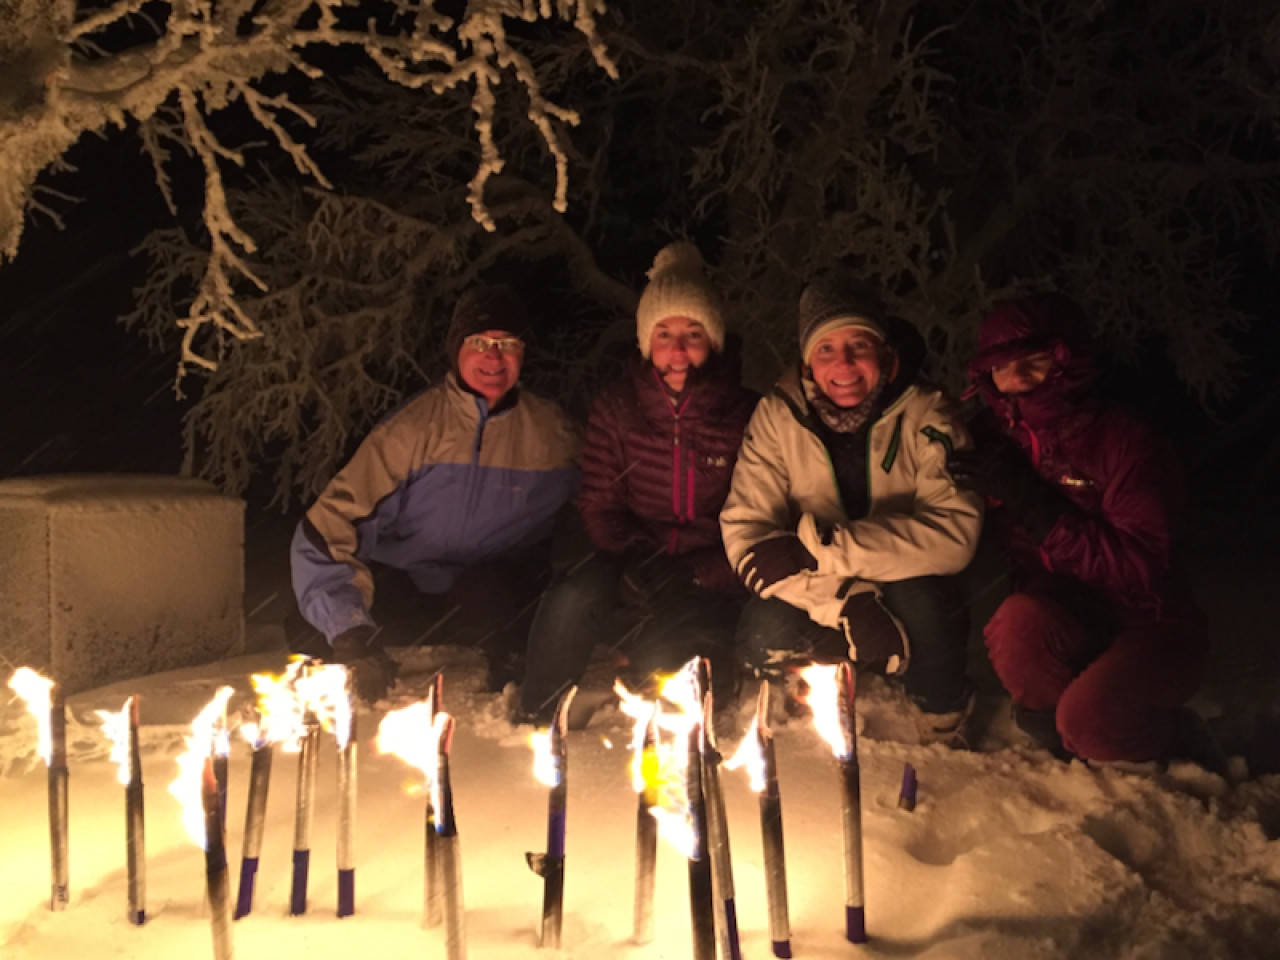 New Year by candlelight in Norway